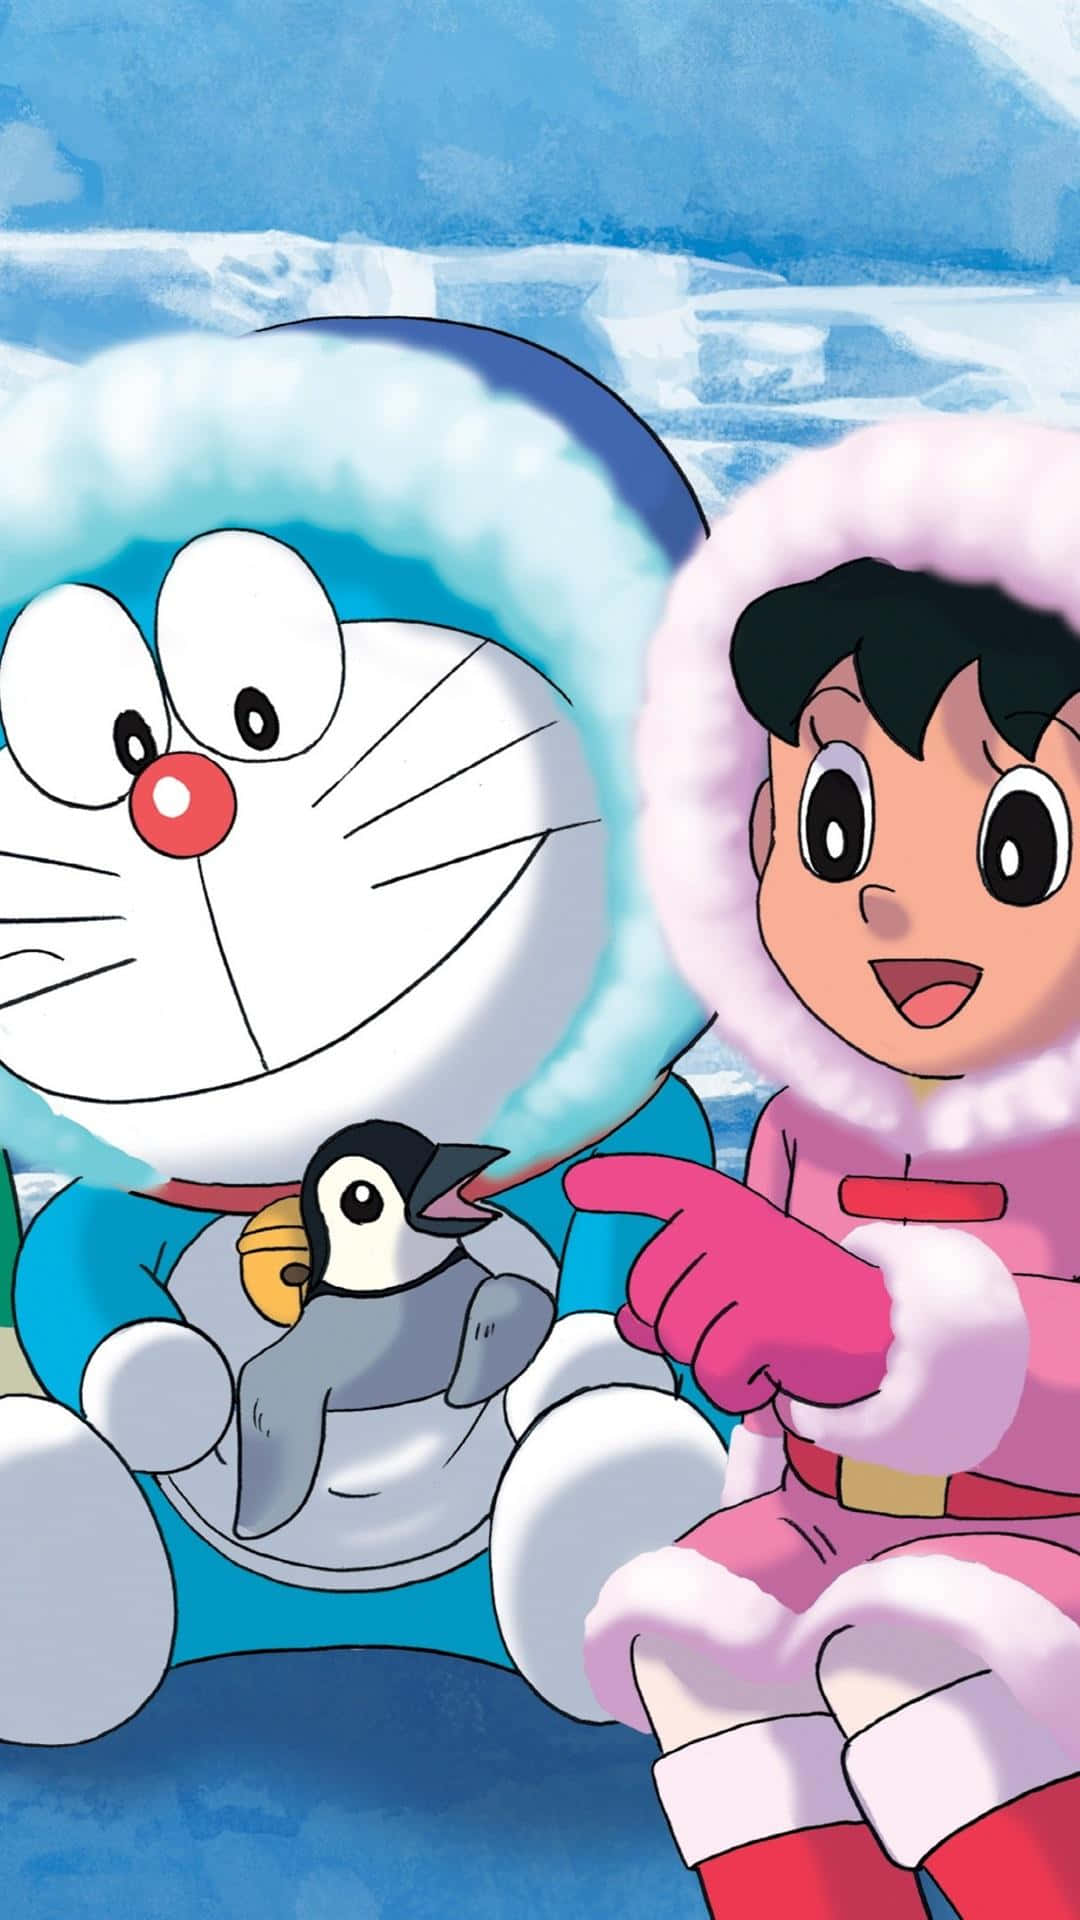 Doraemon: Nobita and The Space Heroes (Anime) - TV Tropes